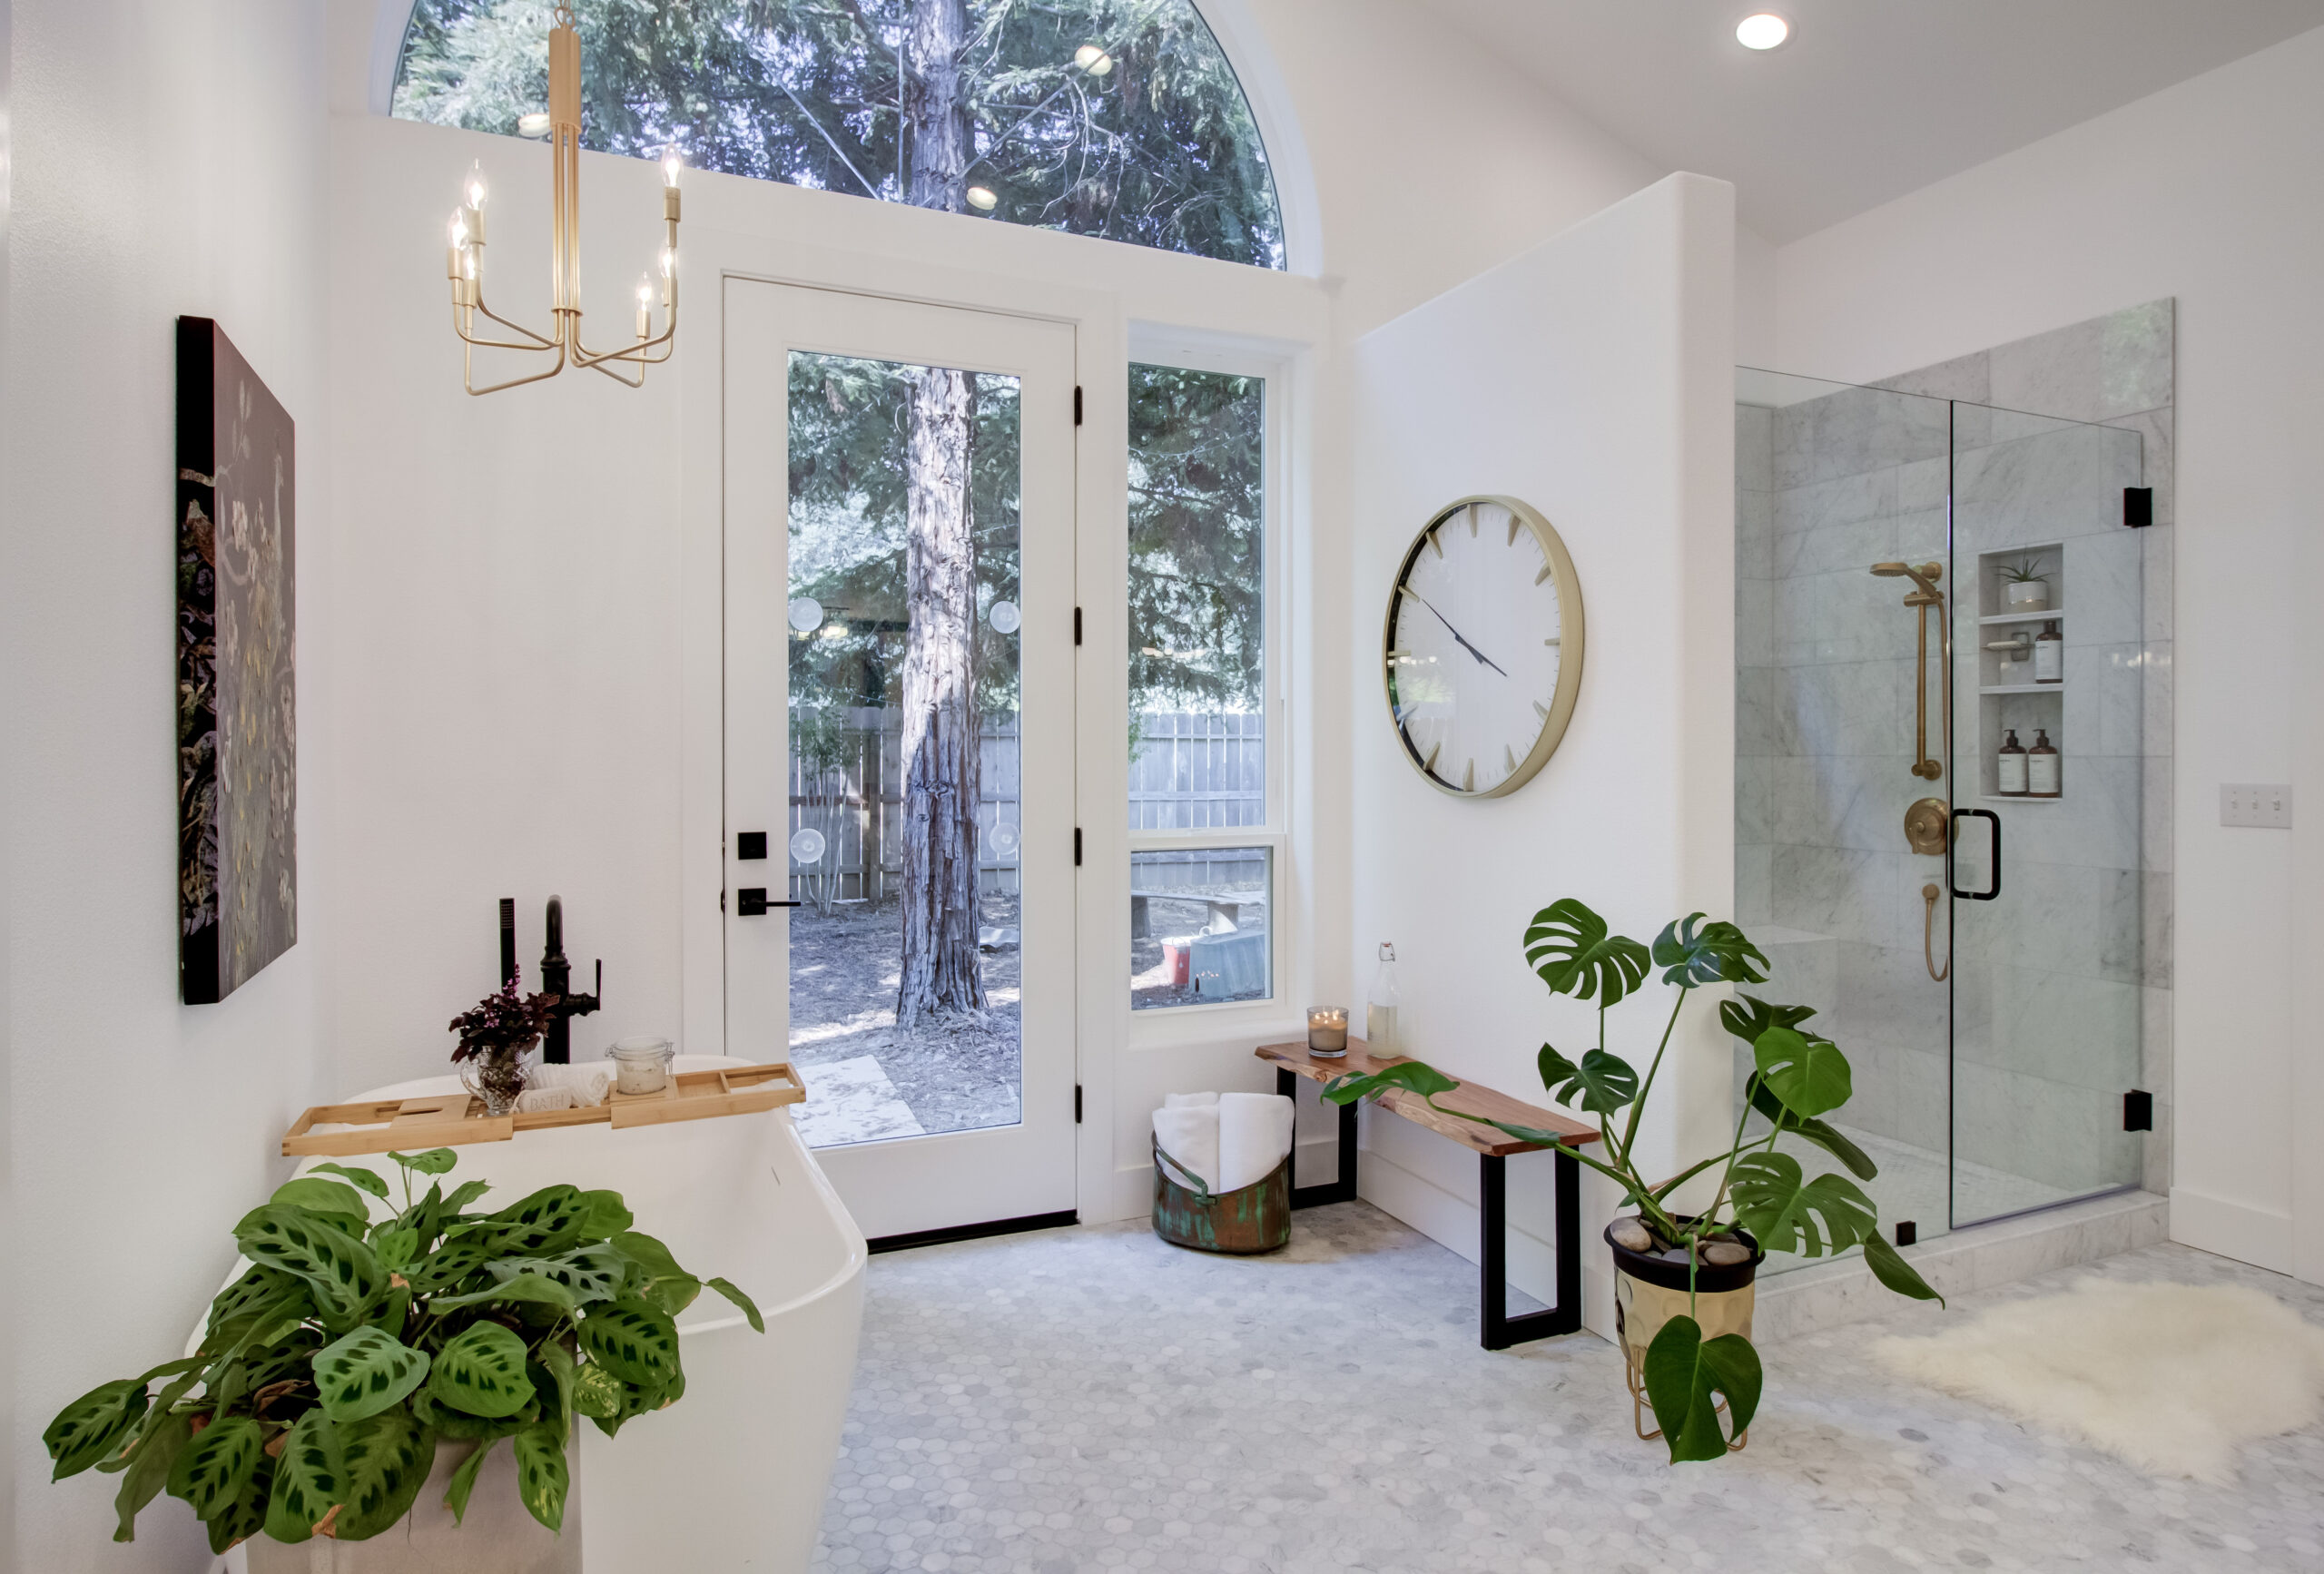 A Master Bathroom Remodel to Flower Farming, a Life Update